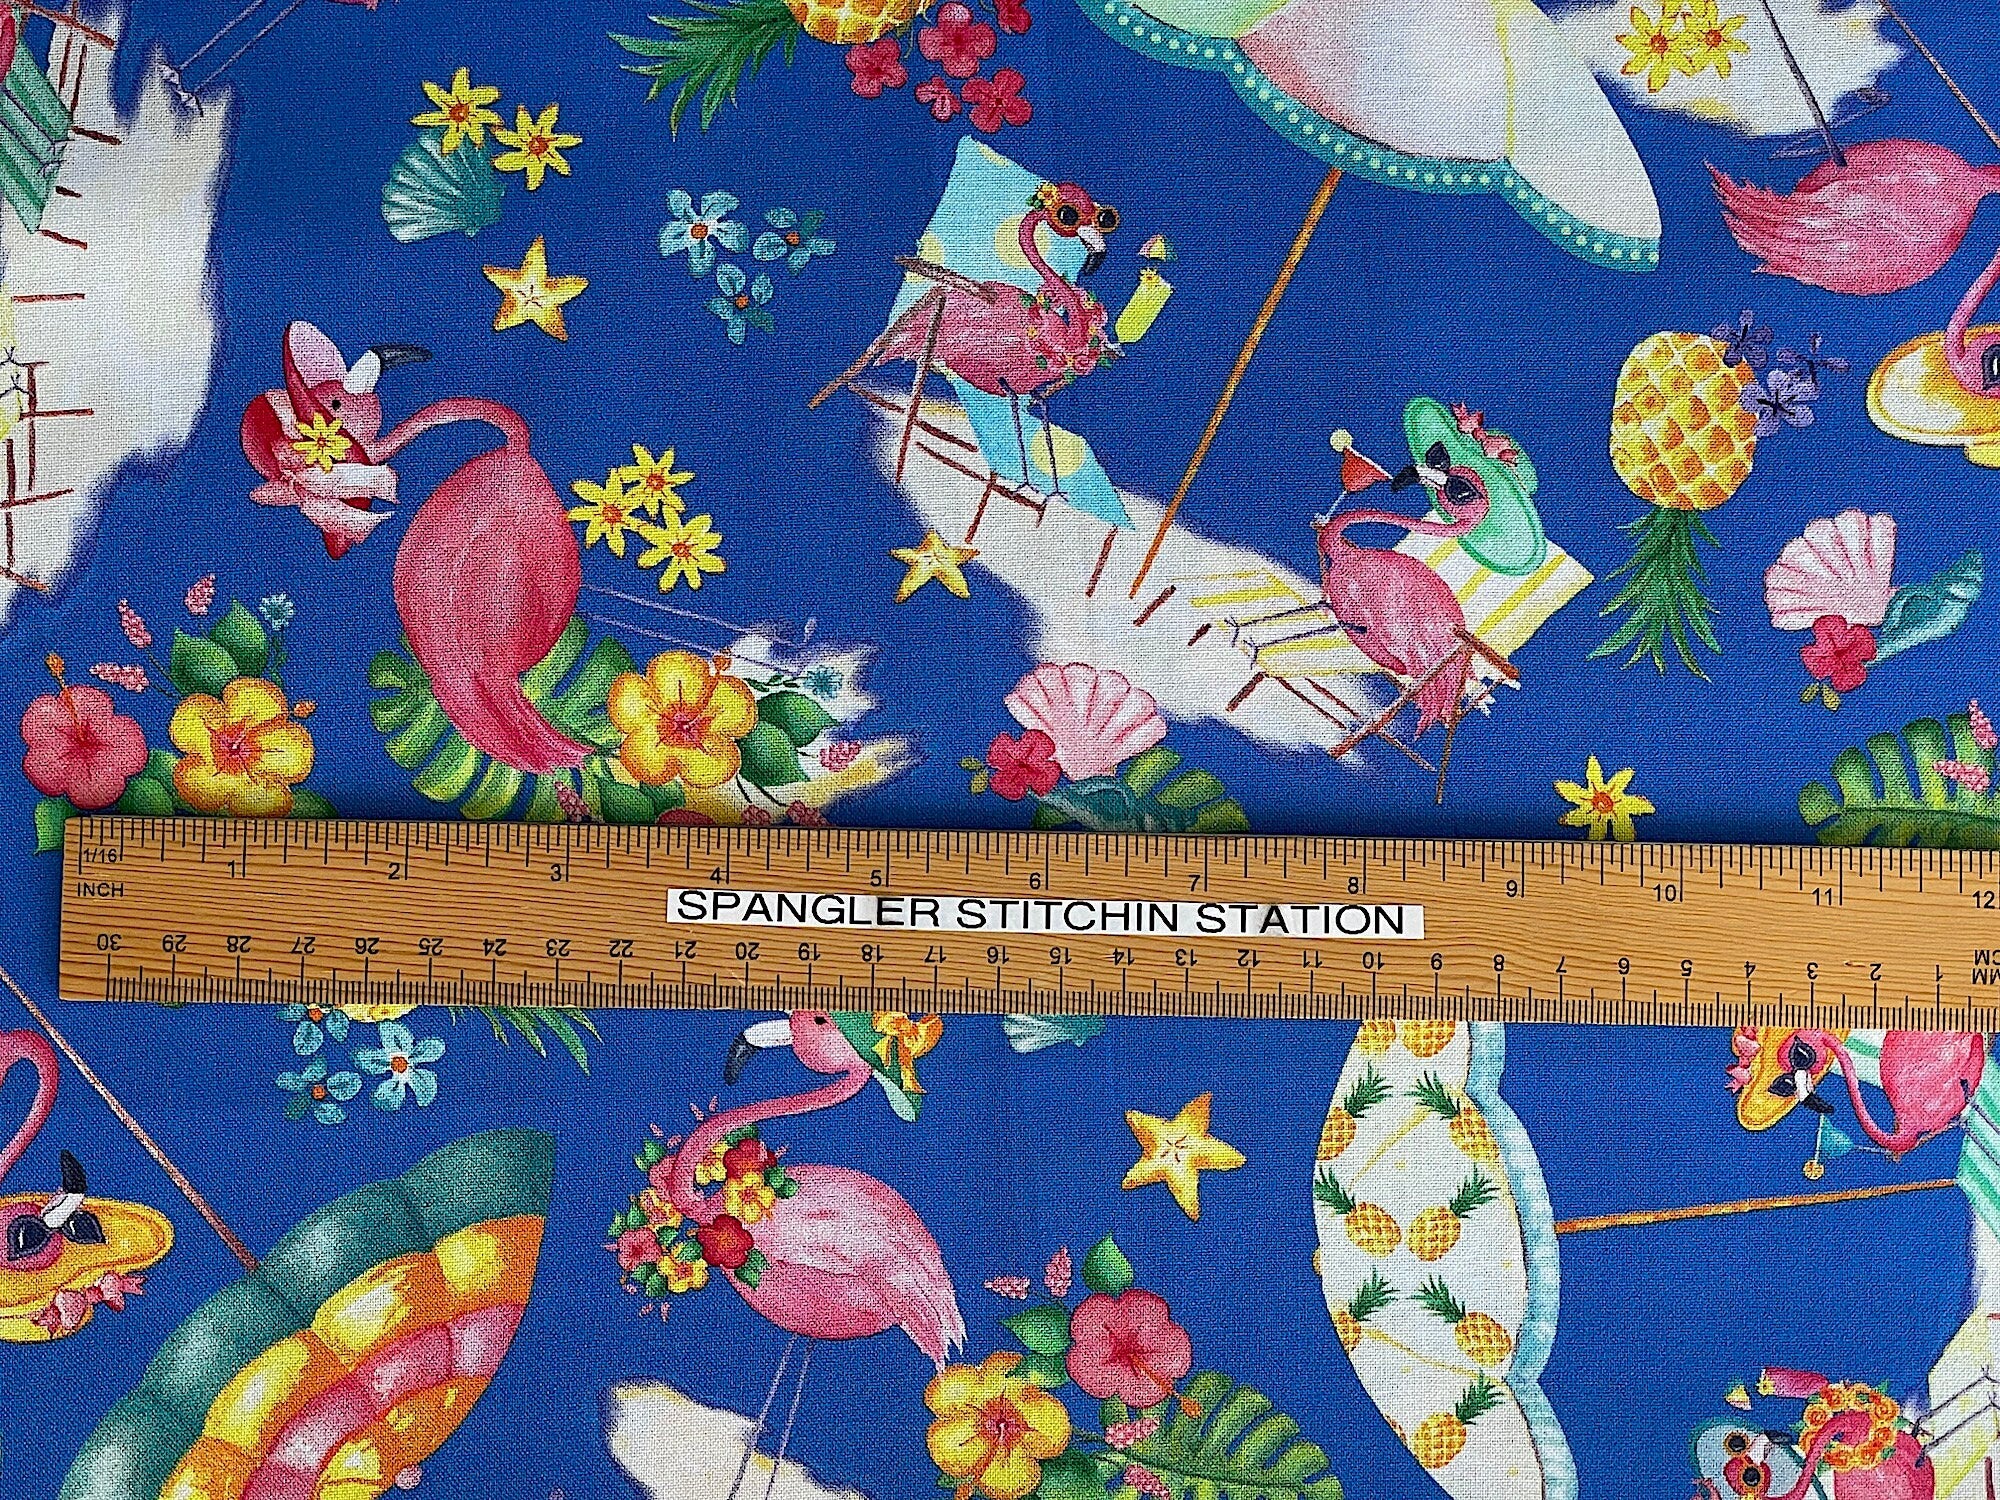 Ruler on fabric to show width.